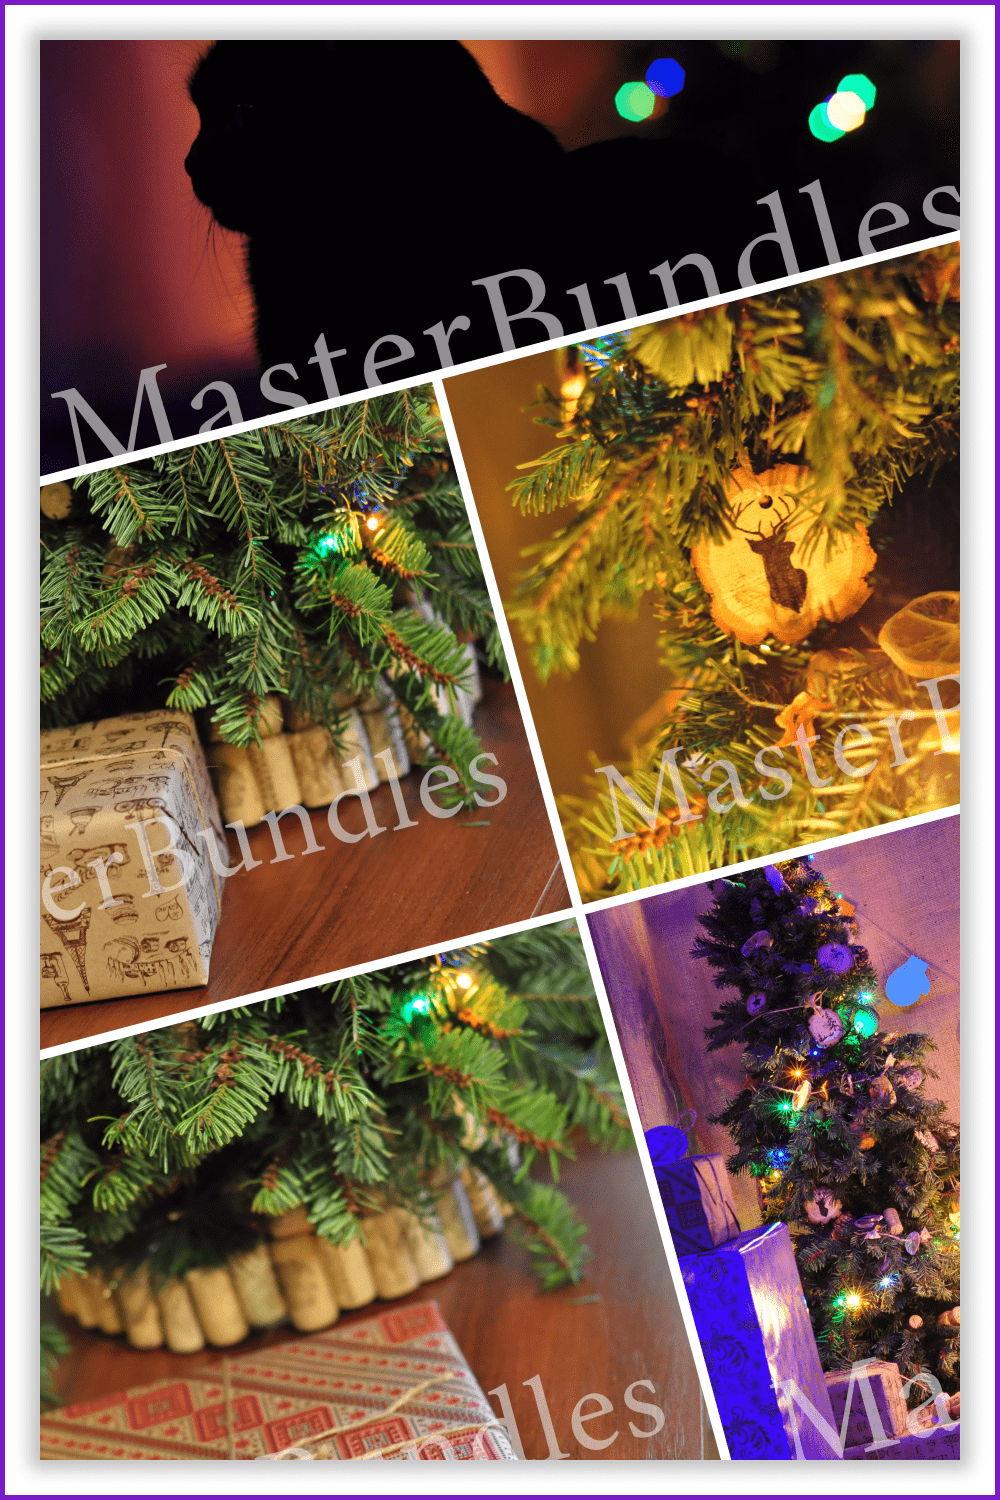 Collage of photos of Christmas trees.